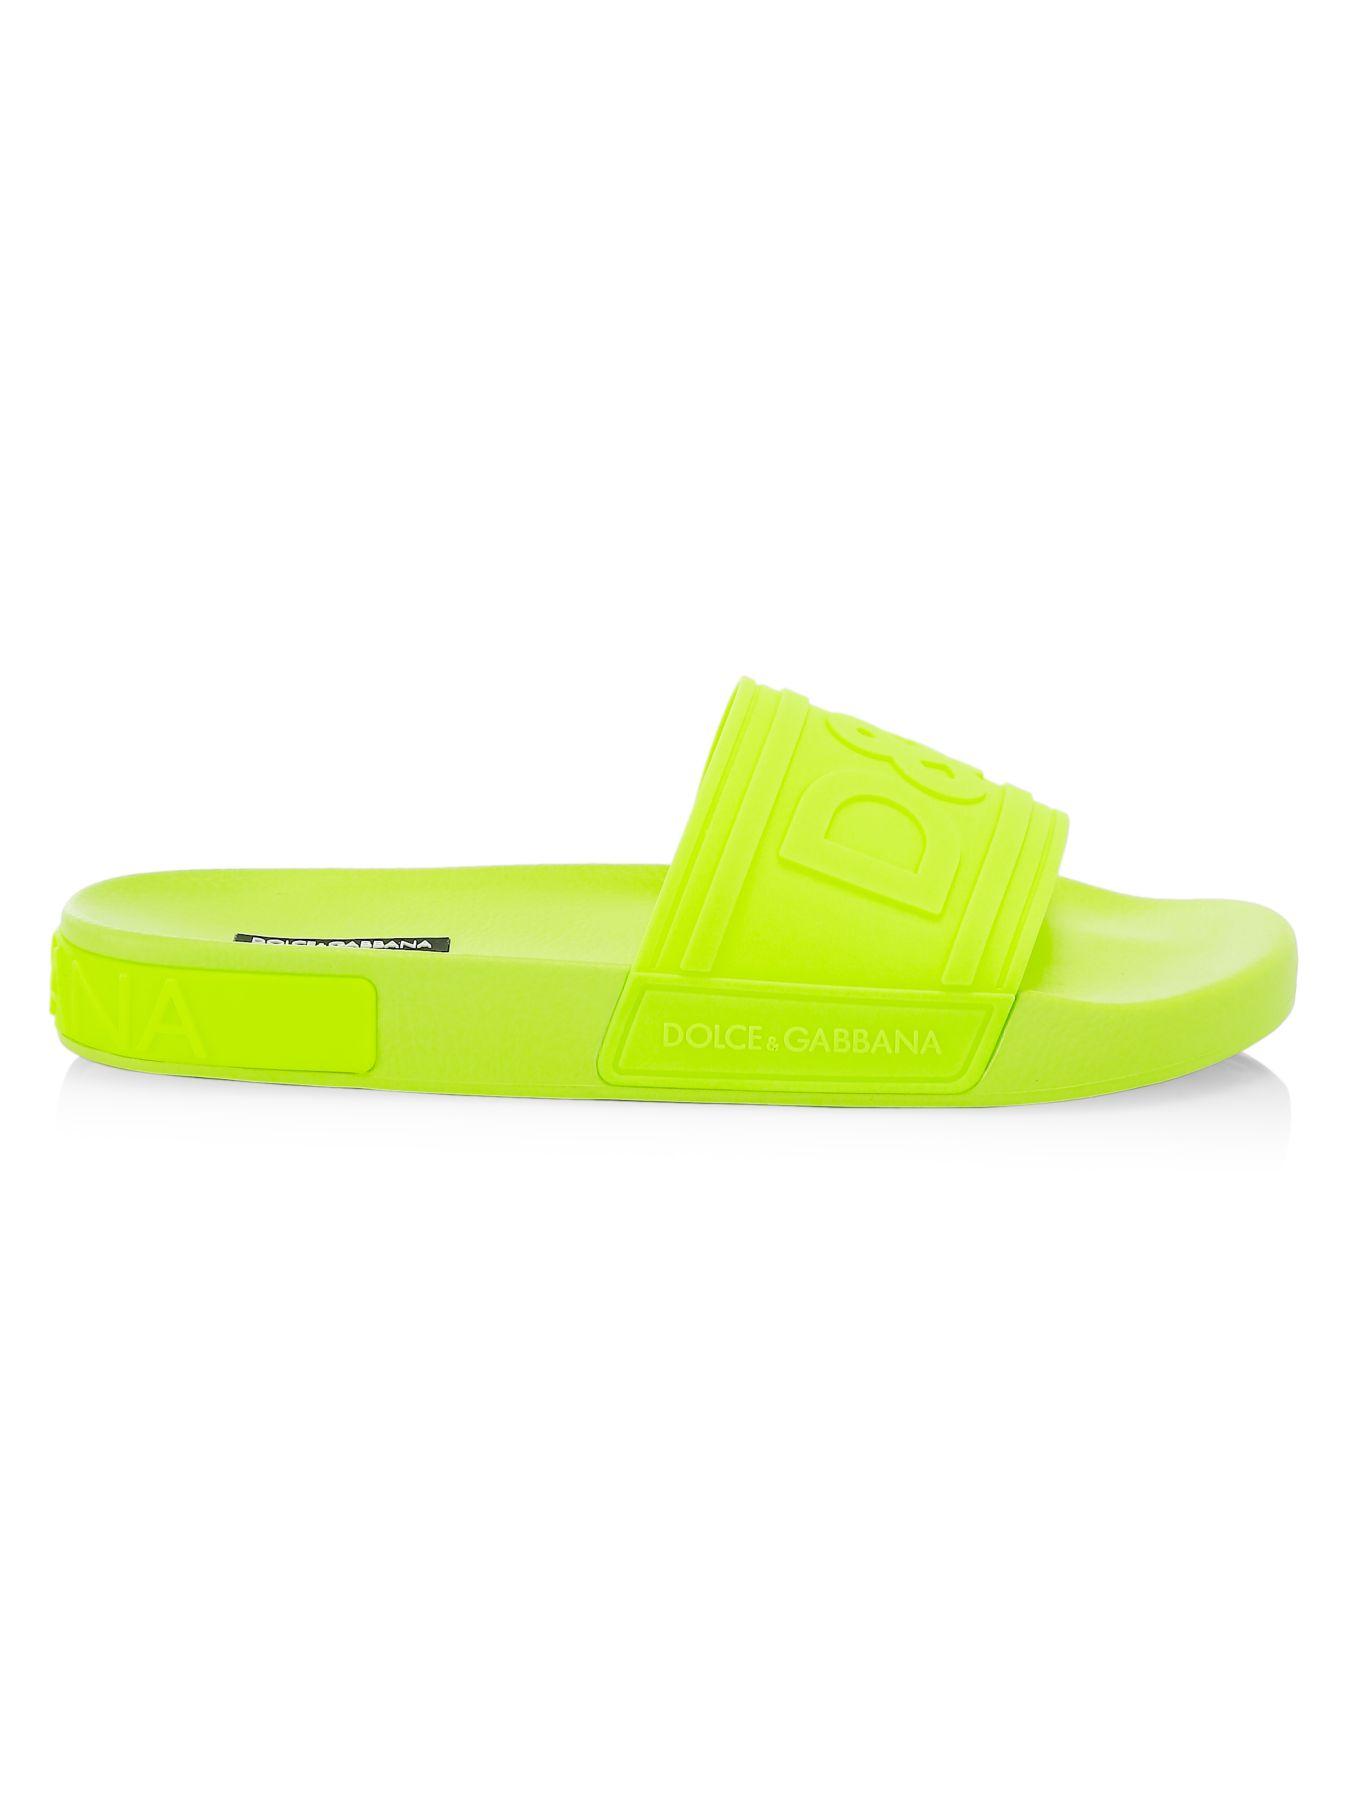 Dolce & Gabbana Rubber Embossed Logo Slides in Yellow for Men - Save 30 ...